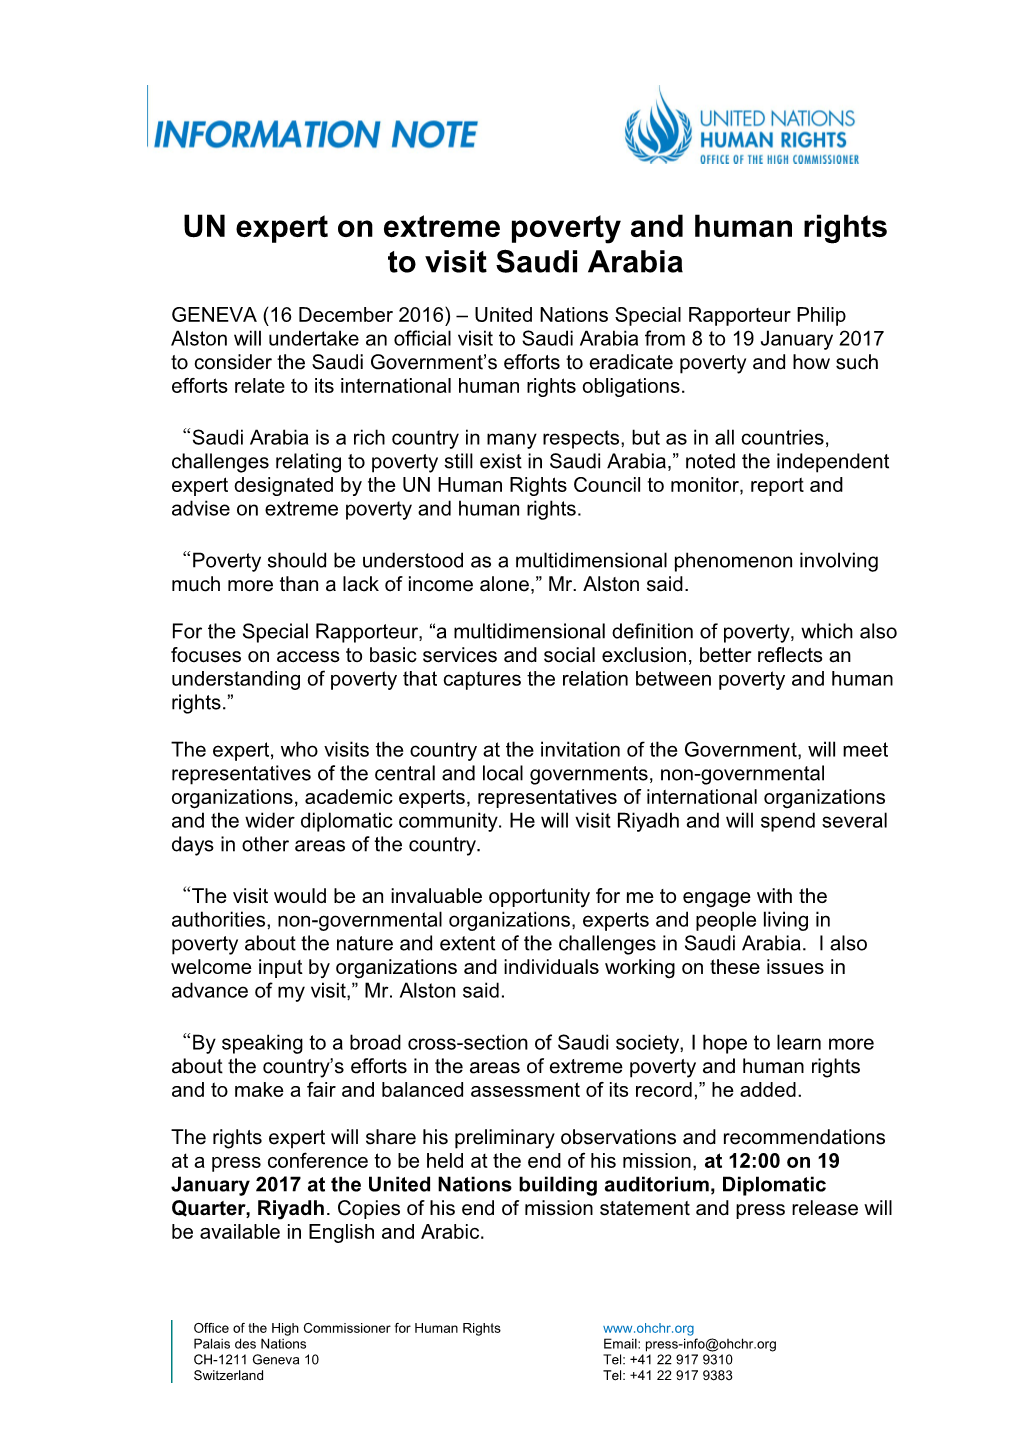 UN Expert on Extreme Poverty and Human Rights to Visit Saudi Arabia